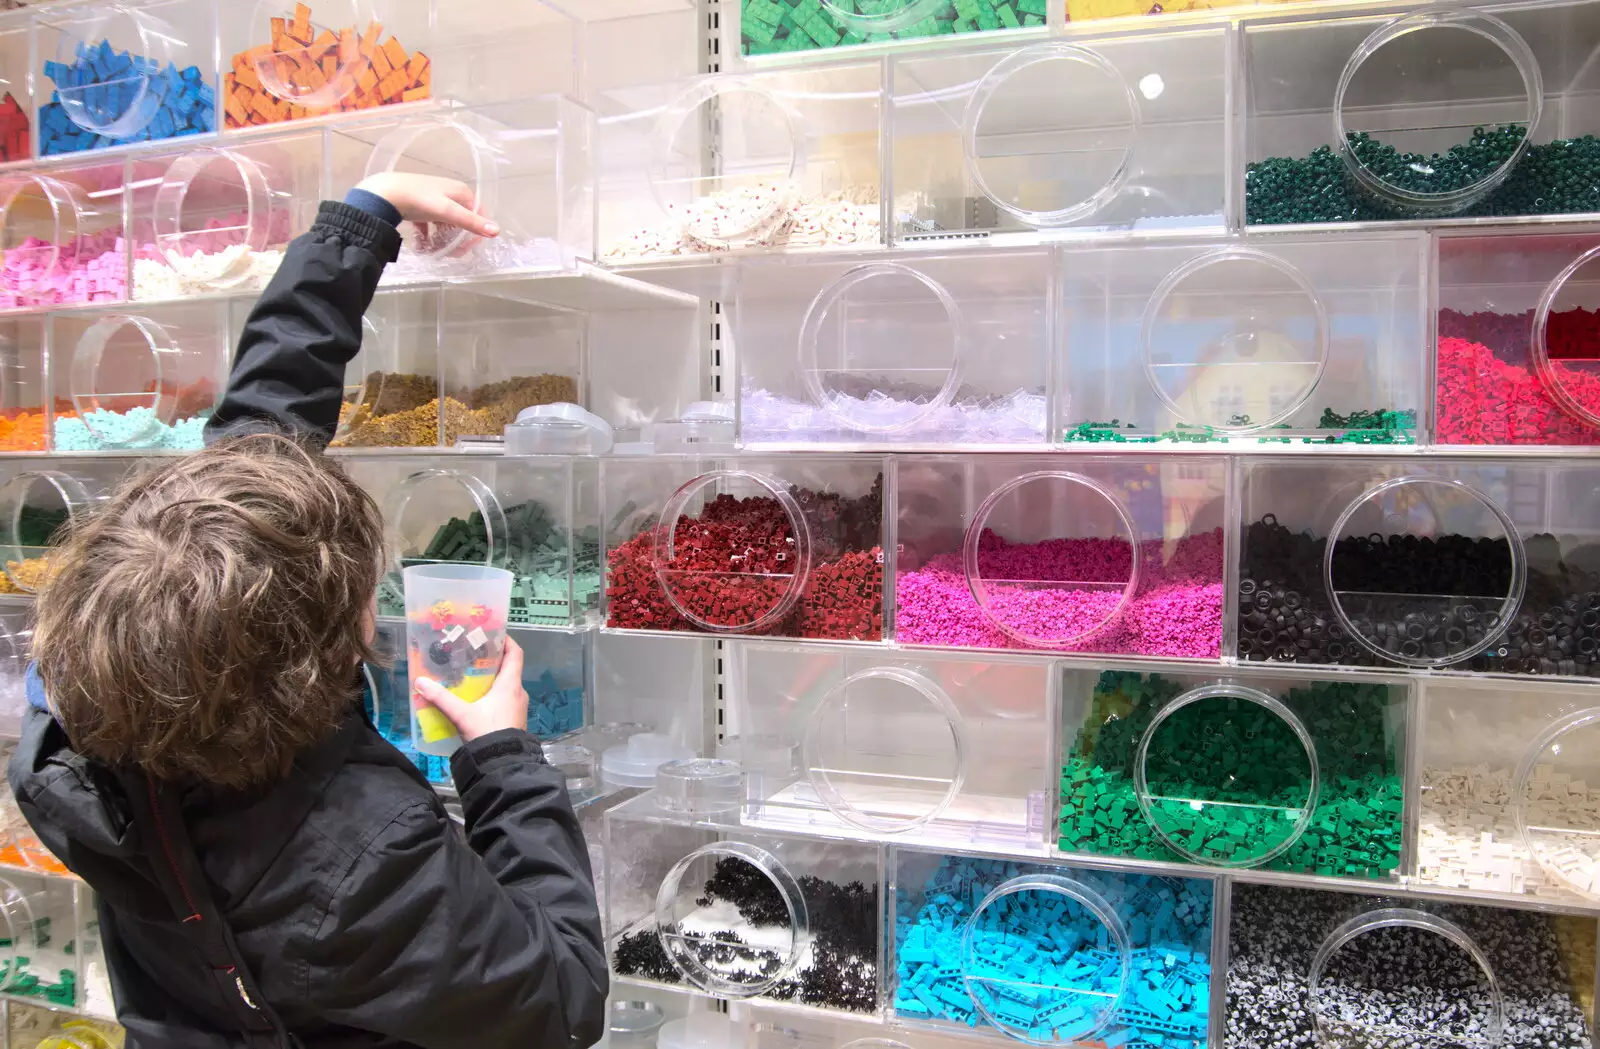 Fred loads up a pick'n'mix Lego tub, for €19, from The Dead Zoo, Dublin, Ireland - 17th February 2023